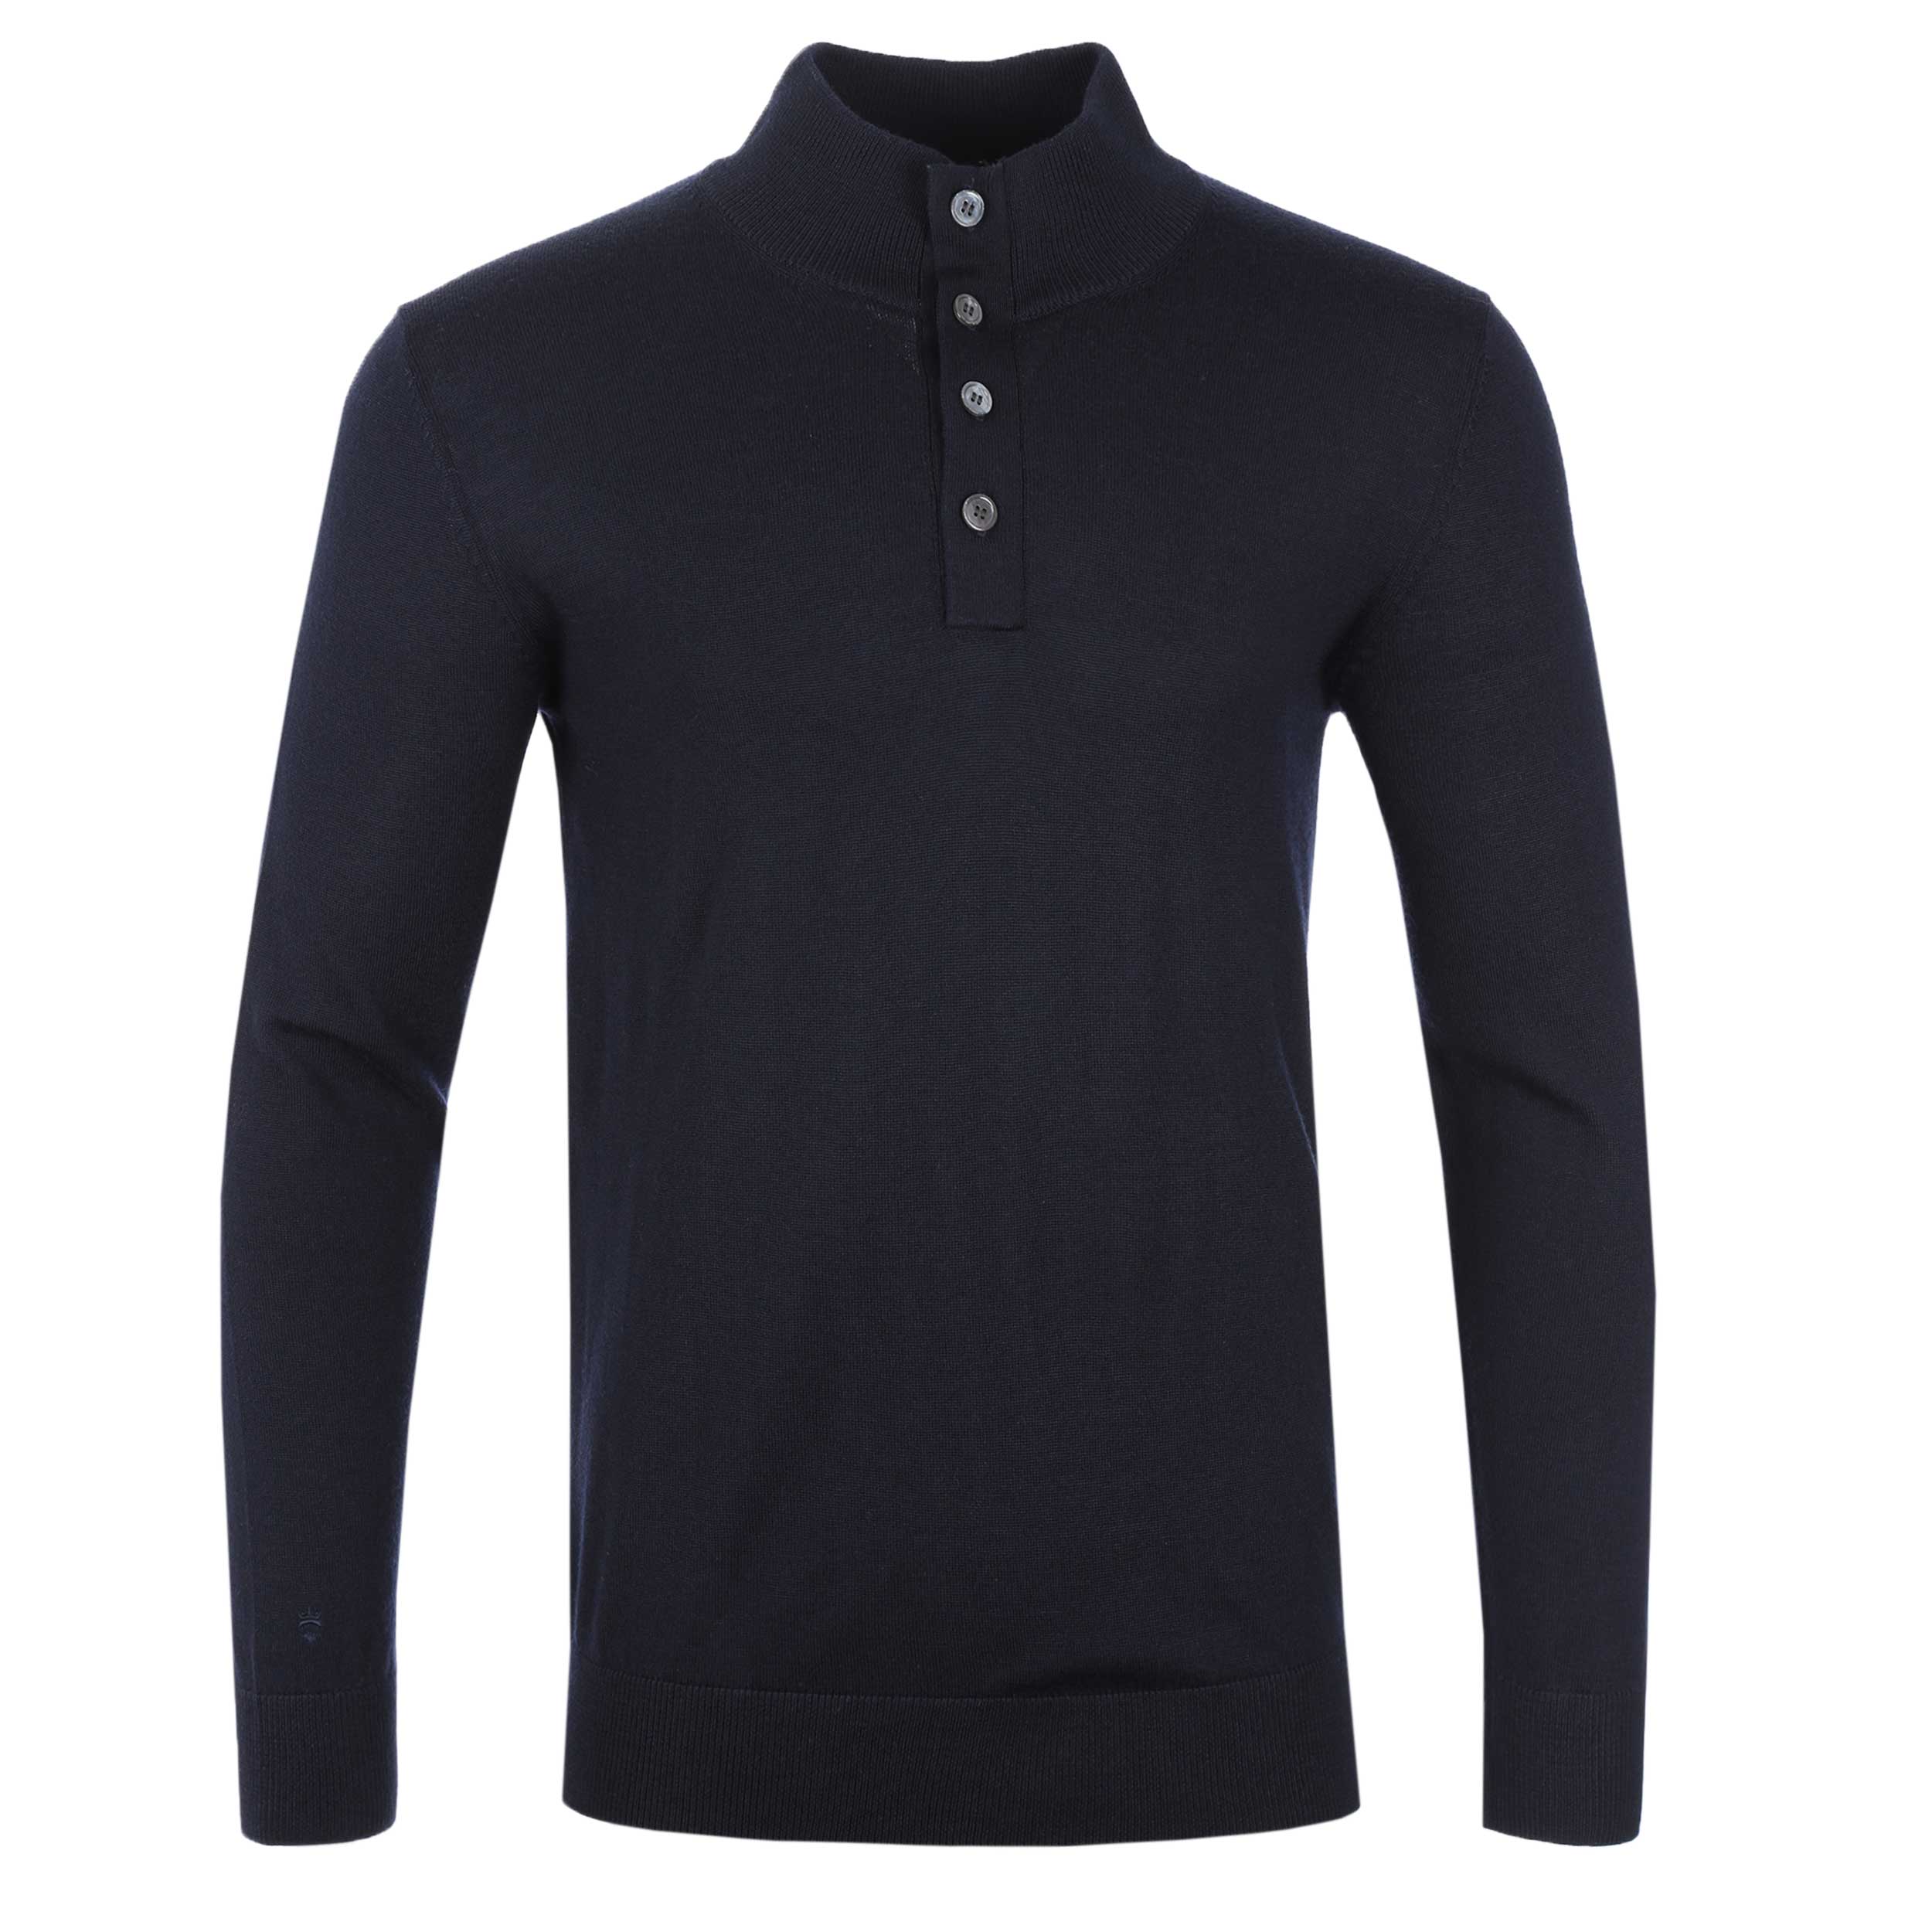 Thomas Maine 3 Button Funnel Neck Knitwear in Navy